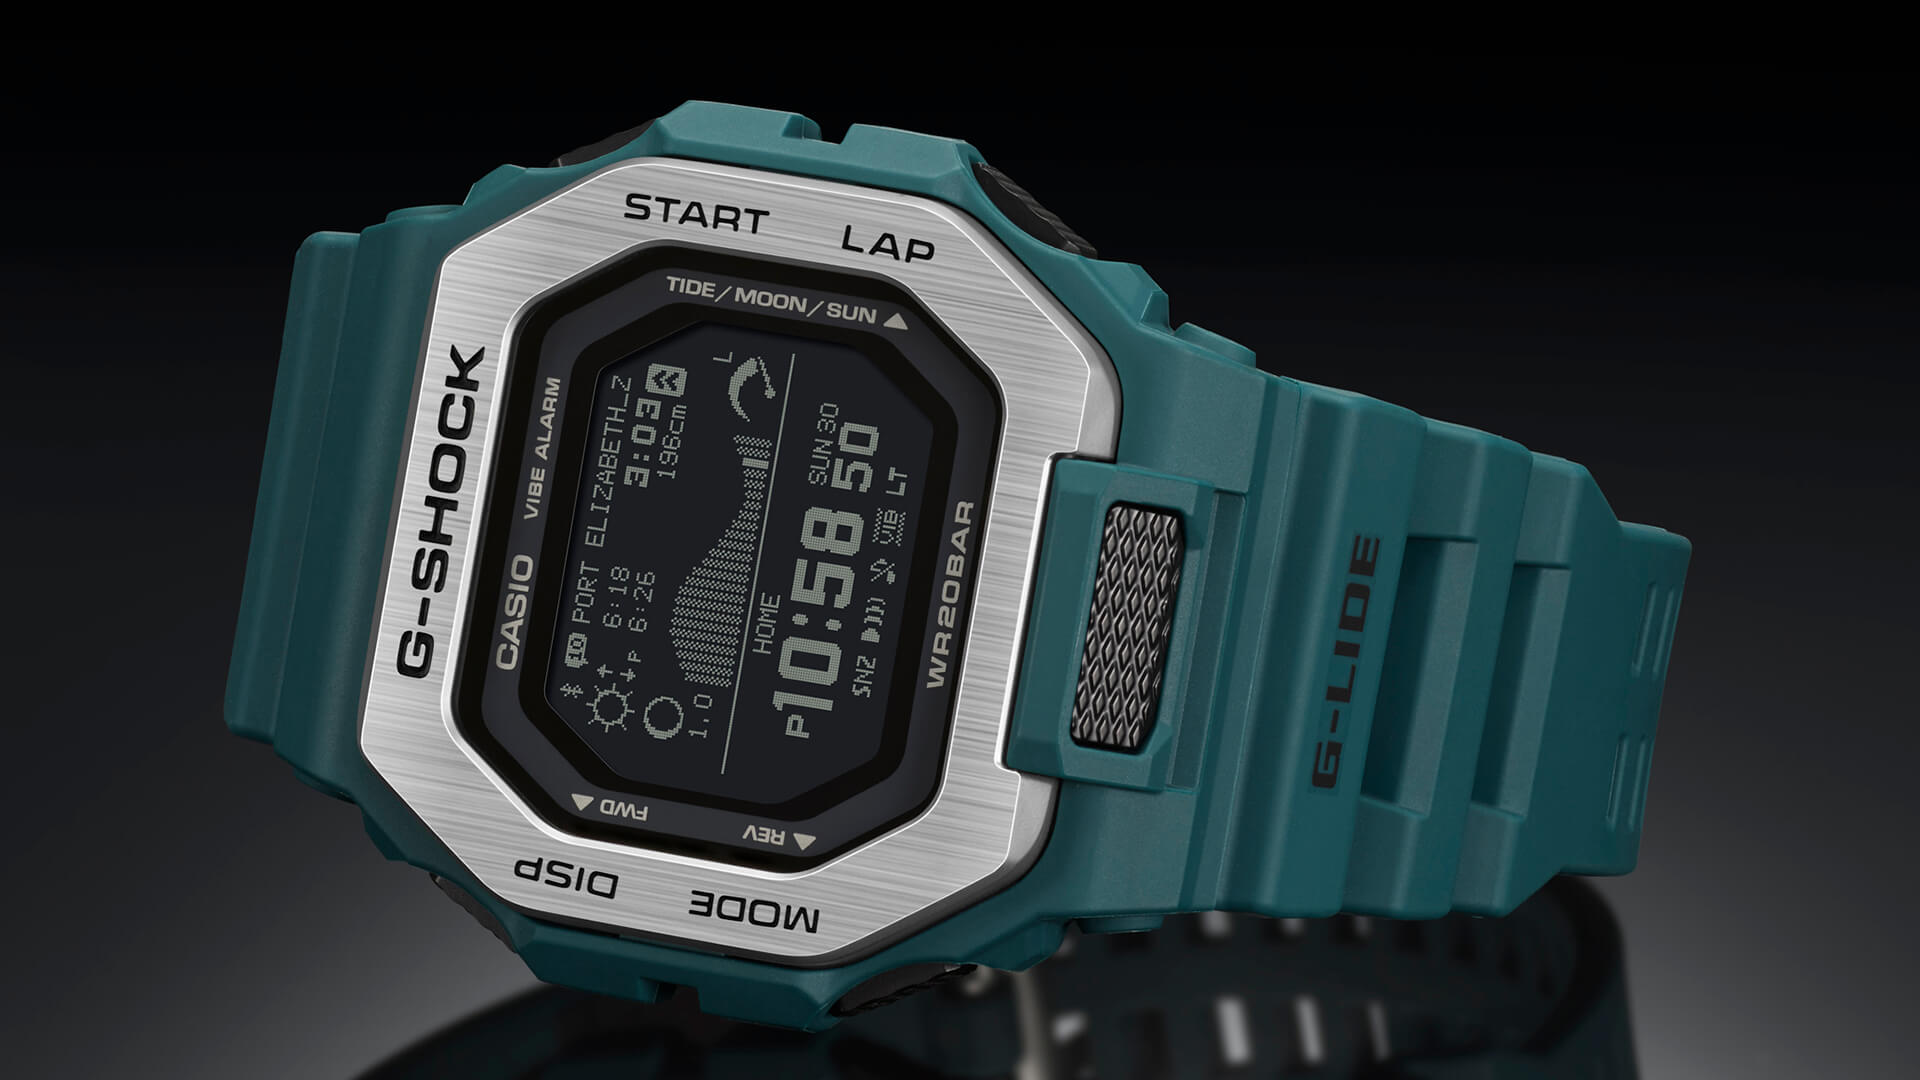 Casio Updates G-Shock G-Lide Series With Three Models Designed For Surfers | aBlogtoWatch